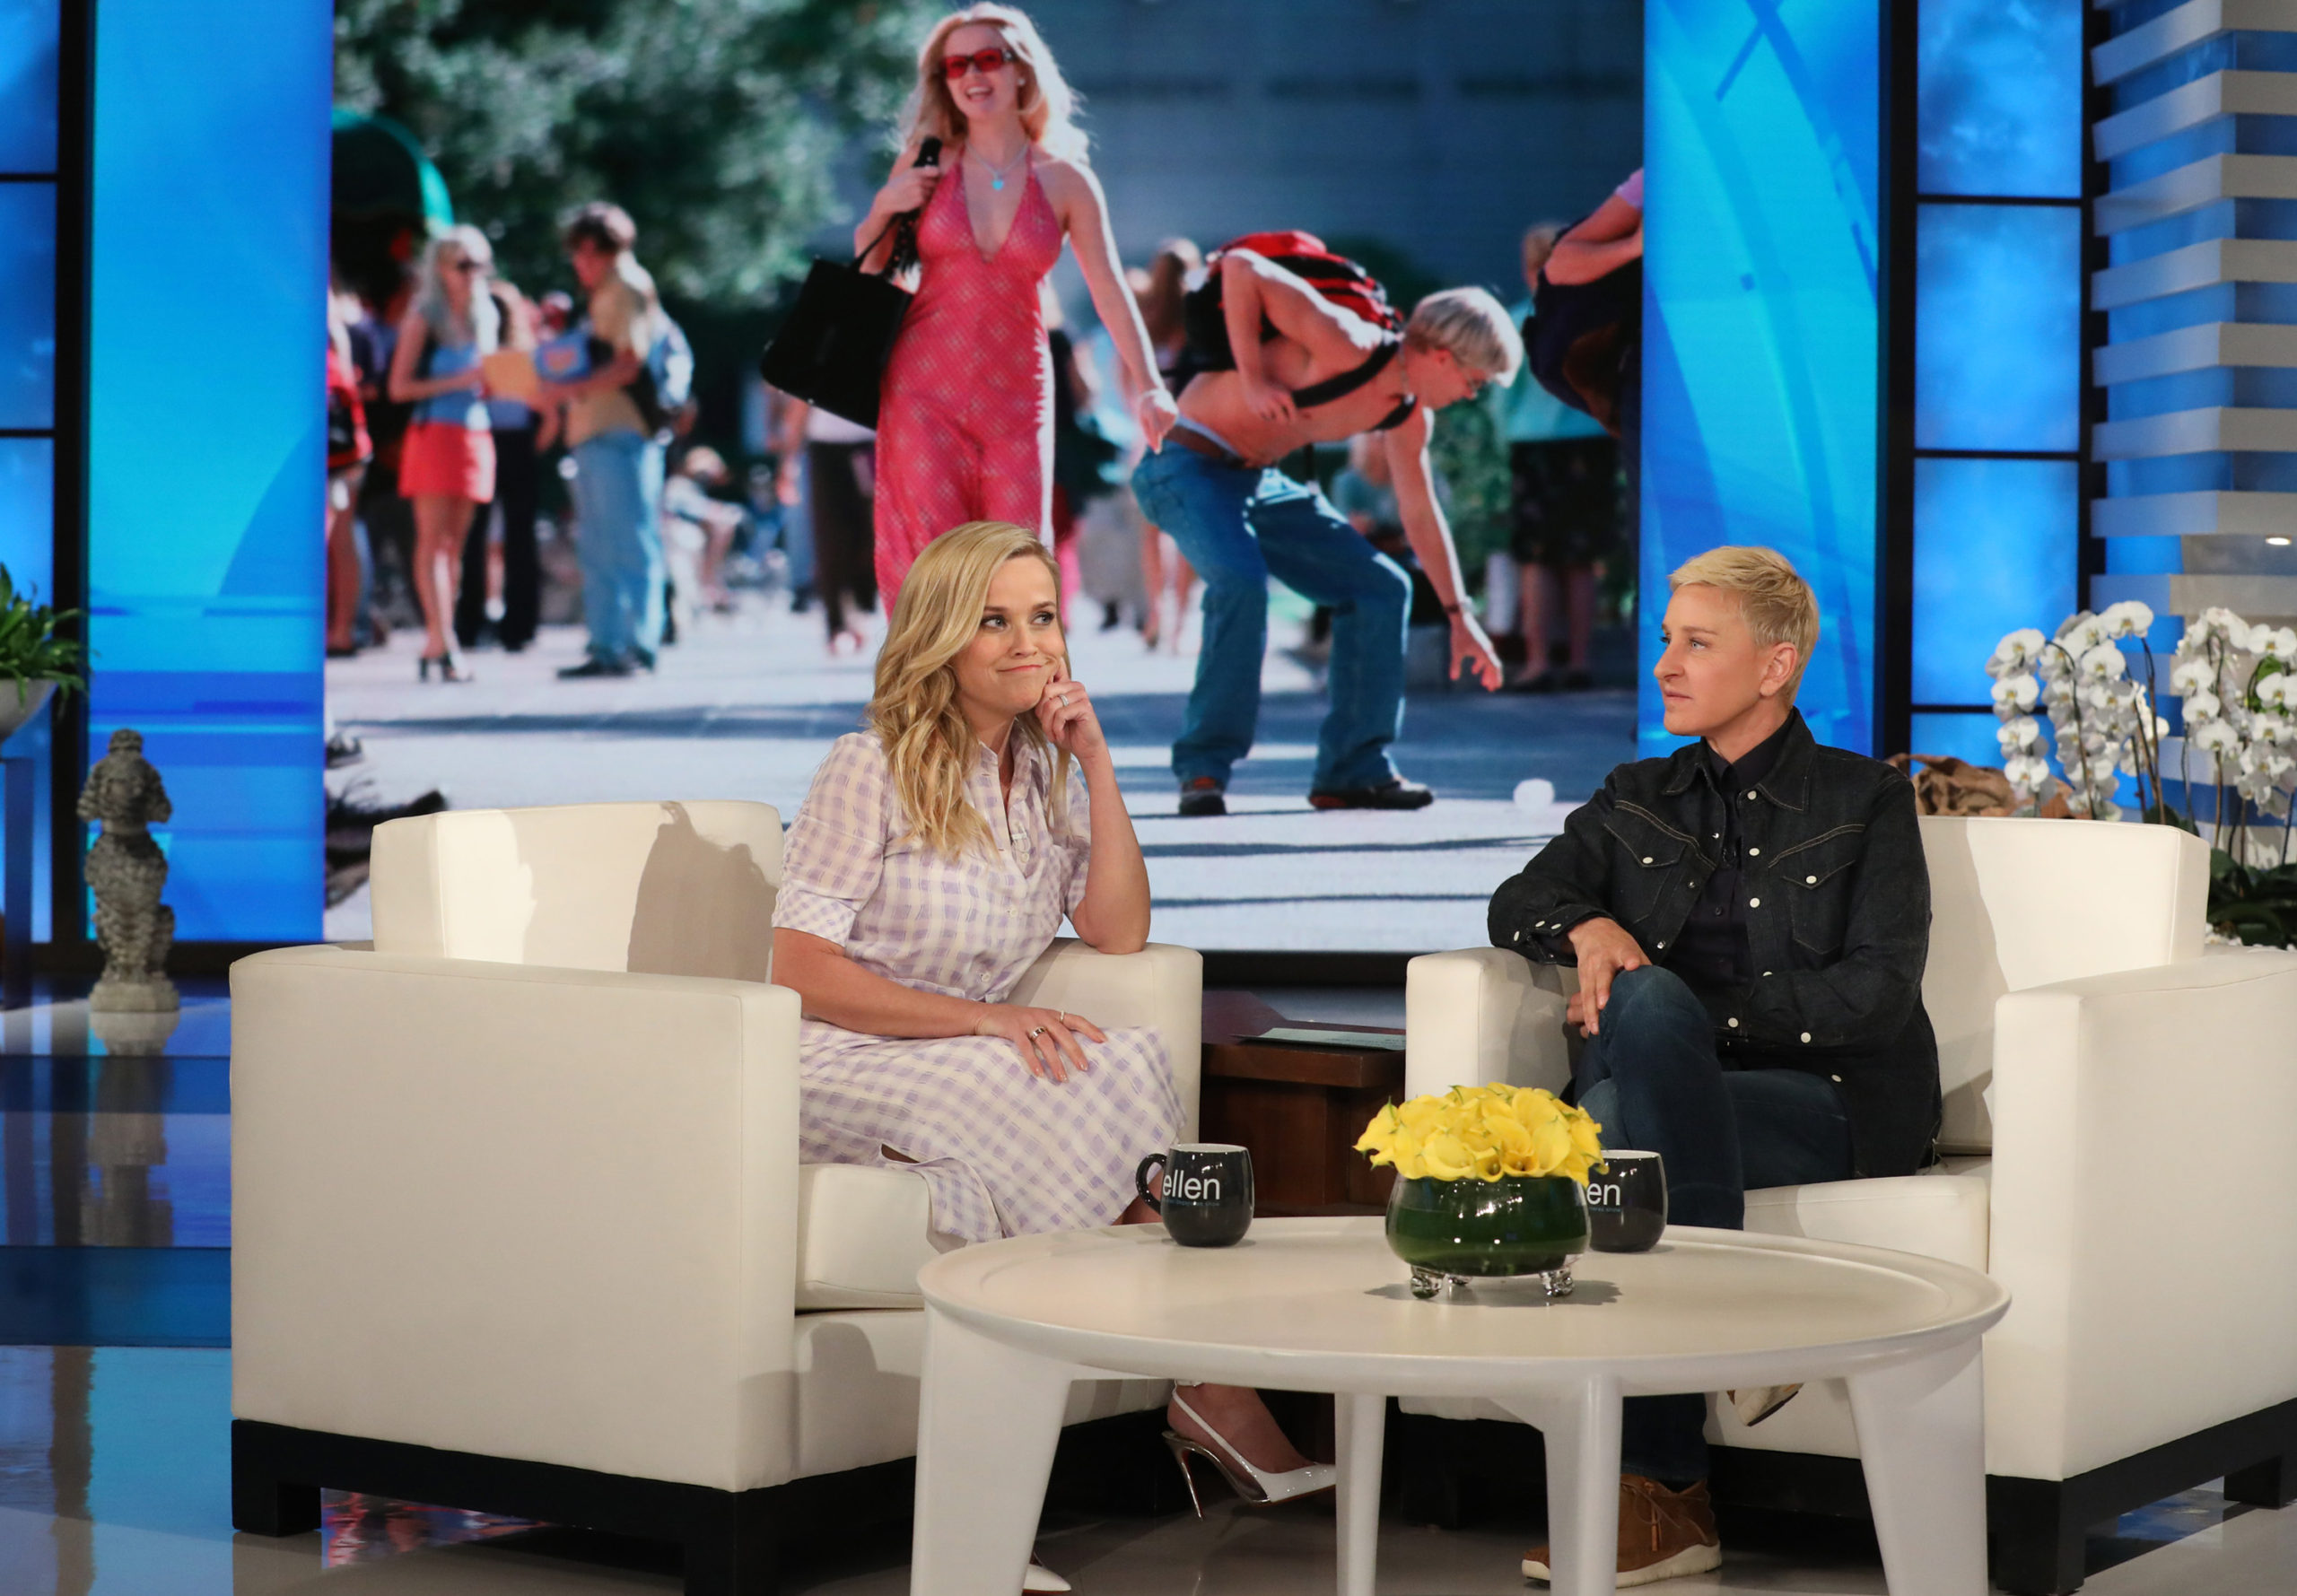 Reese Witherspoon, The Ellen DeGeneres Show, Legally Blonde 3